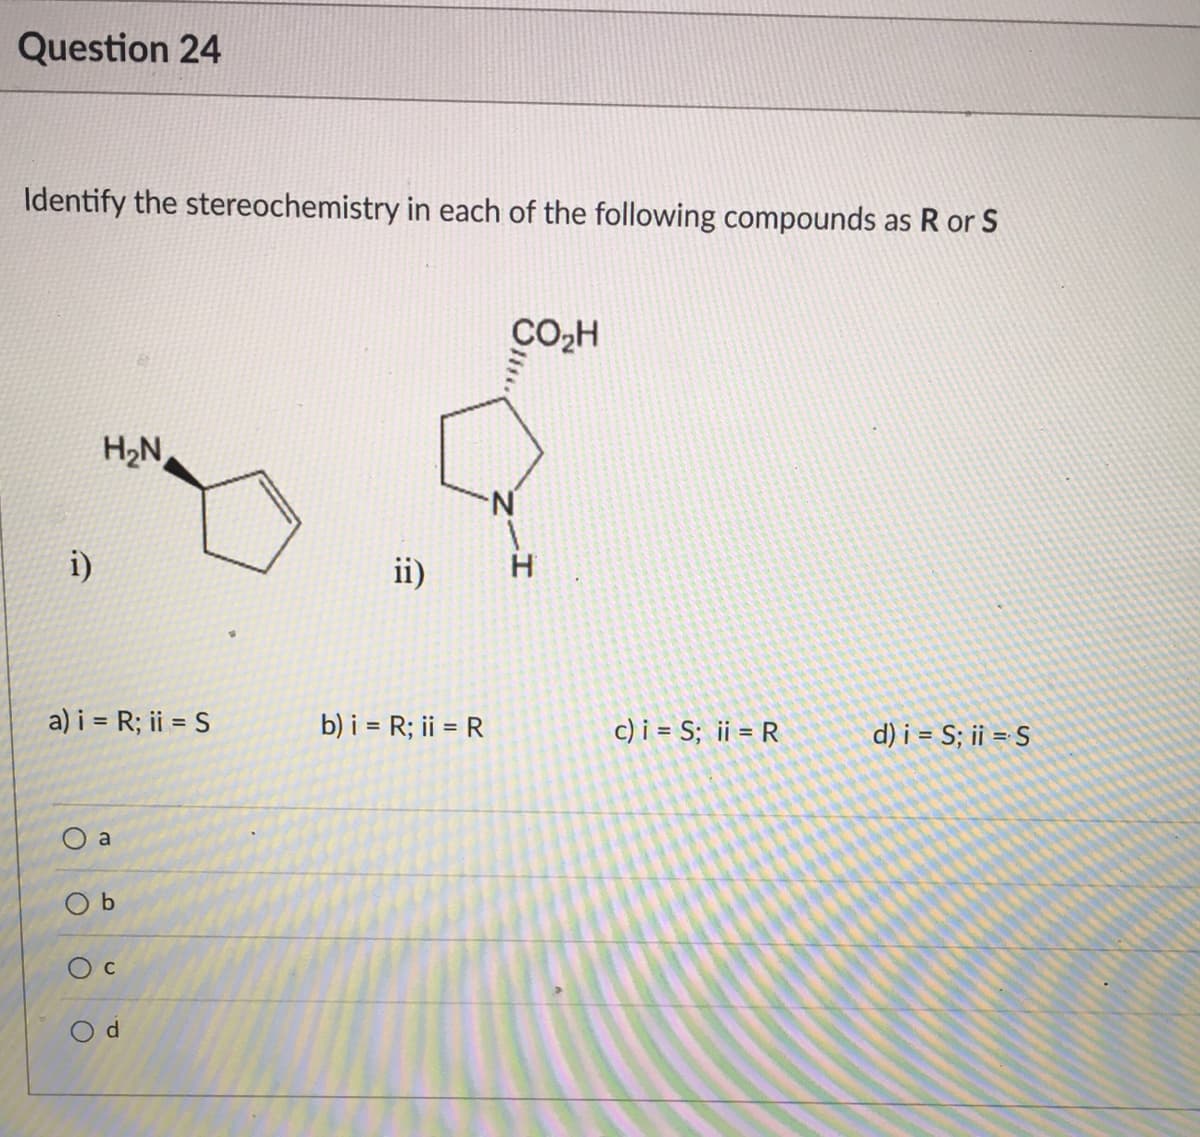 Question 24
Identify the stereochemistry in each of the following compounds as R or S
CO,H
H;N
i)
ii)
a) i = R; ii = S
b) i = R; ii = R
c) i = S; ii = R
d) i = S; ii = S
a
O b
O d
